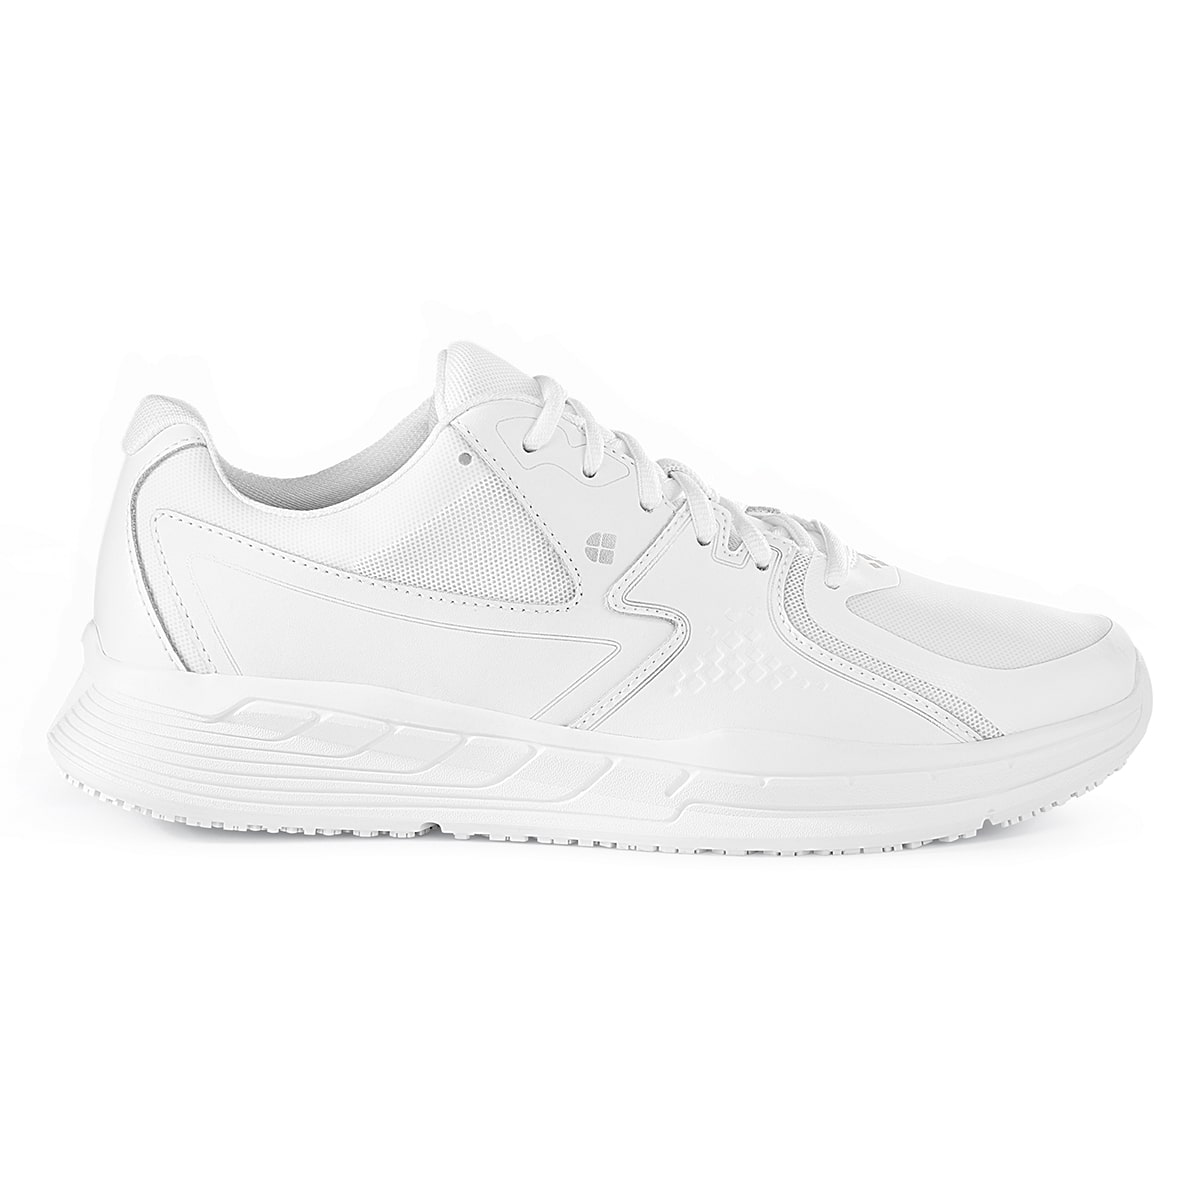 The Condor Men's White from Shoes for Crews is a slip-resistant shoe with laces, with additional padding and a removable cushioned insole, seen from the right.